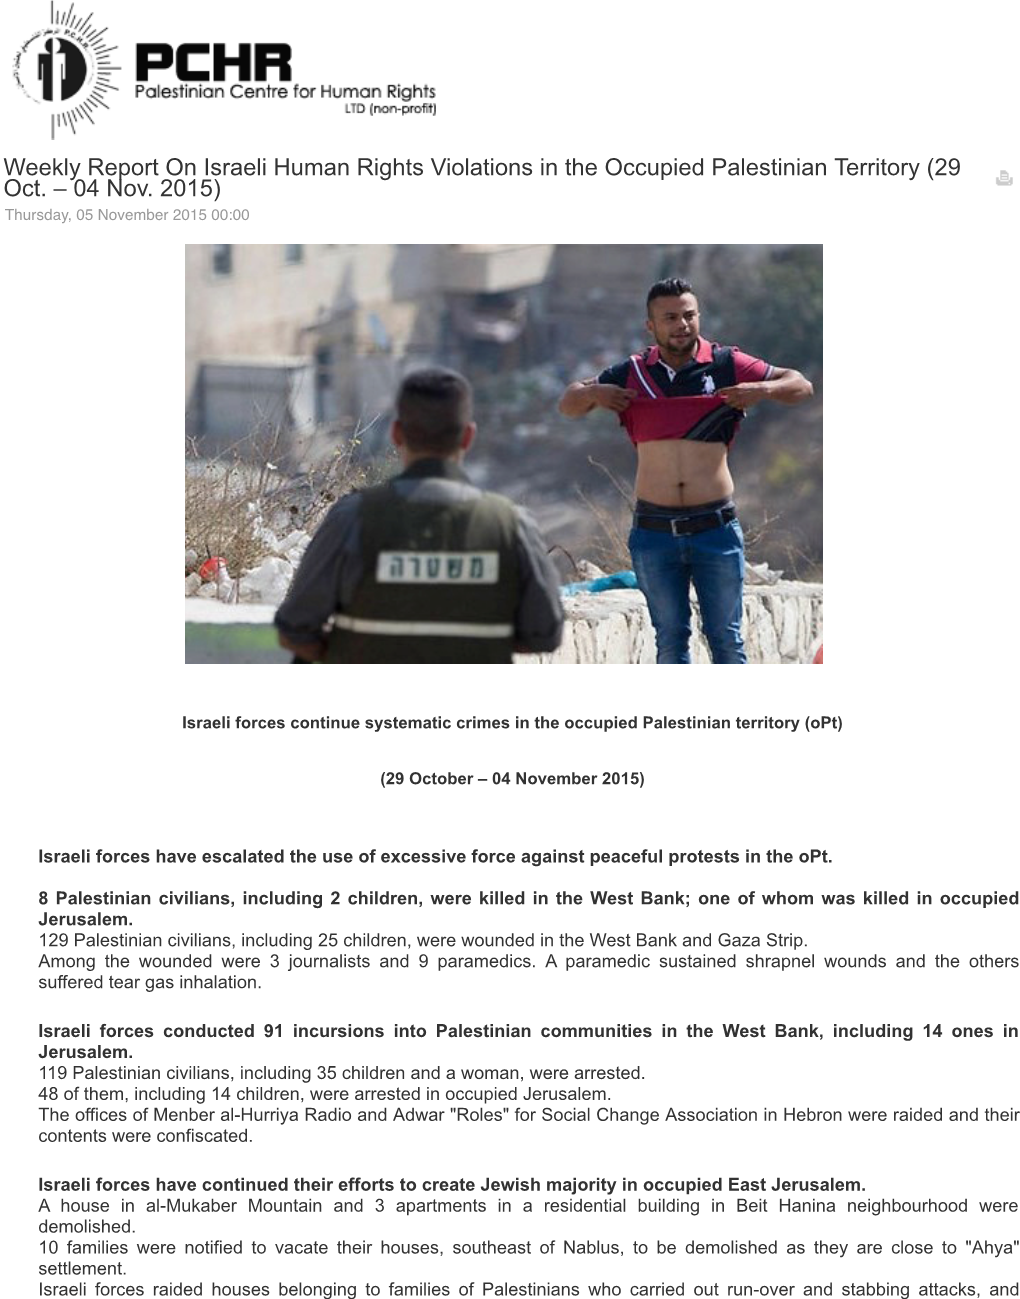 Weekly Report on Israeli Human Rights Violations in the Occupied Palestinian Territory (29 Oct